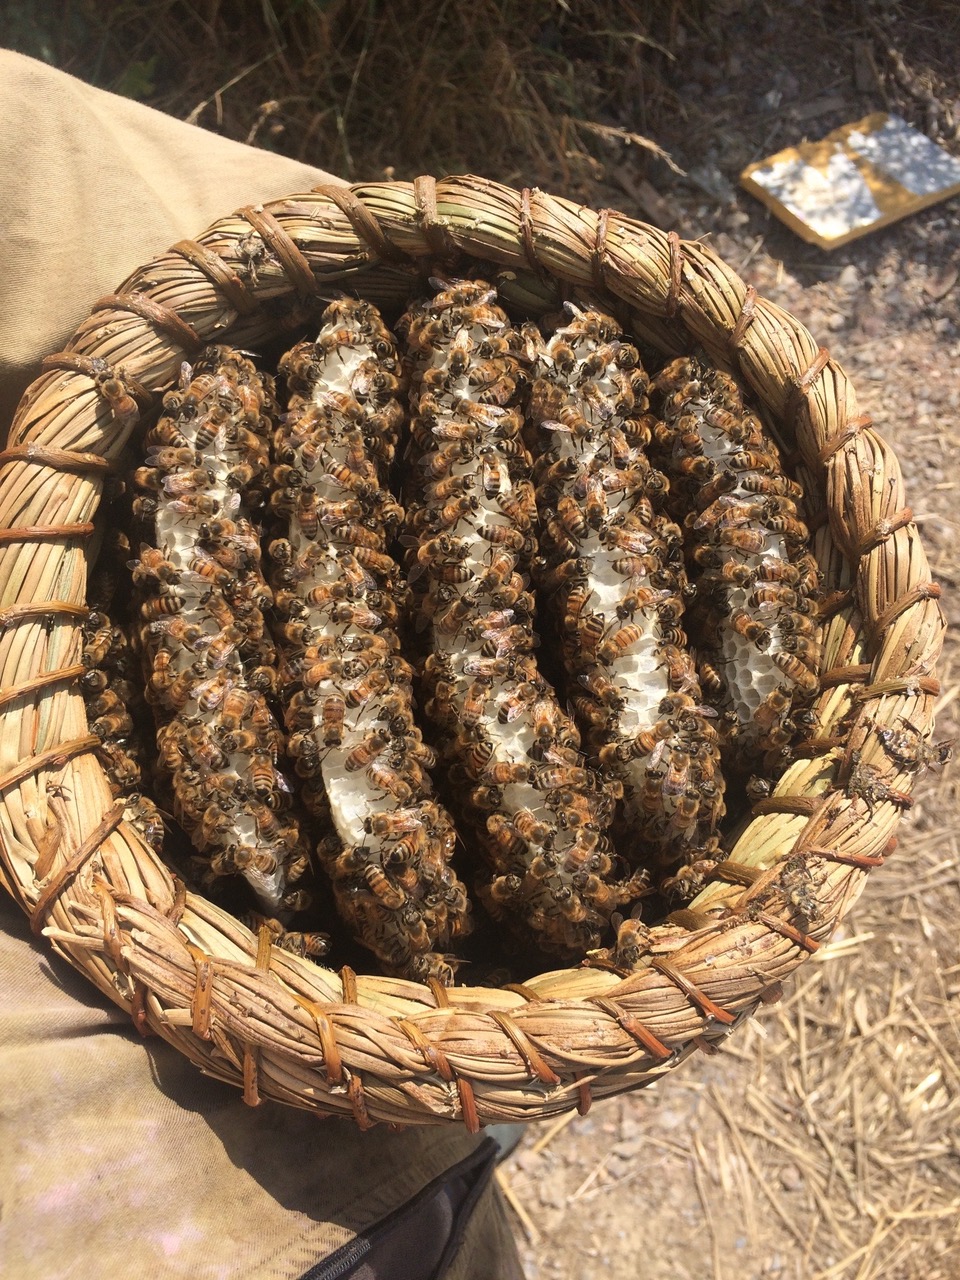 Skep with honeycombs and bees